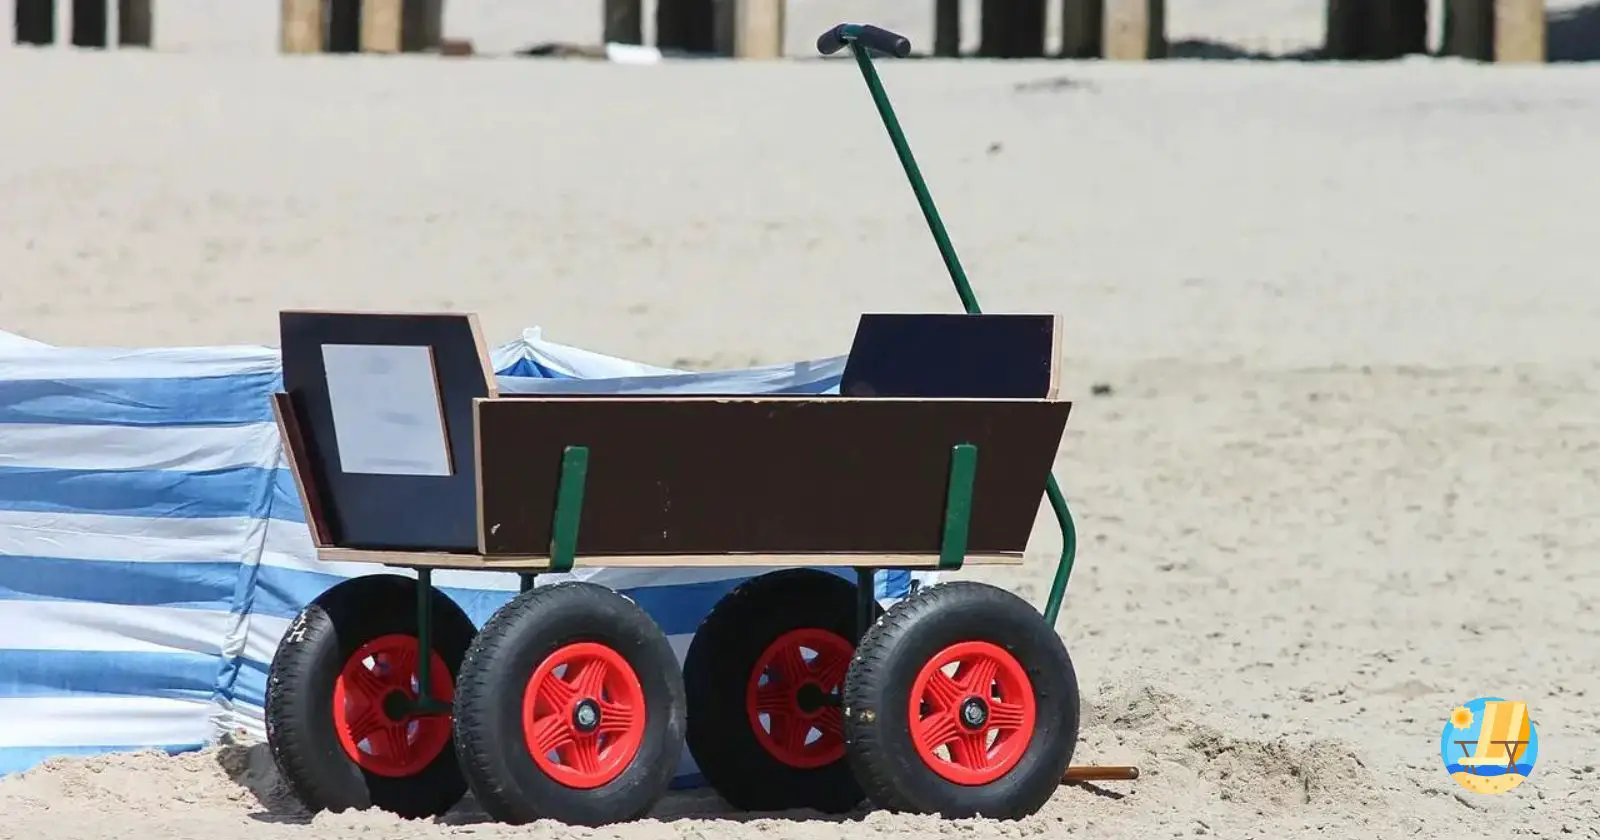 Best Beach Cart with Large Balloon Tires For Sand